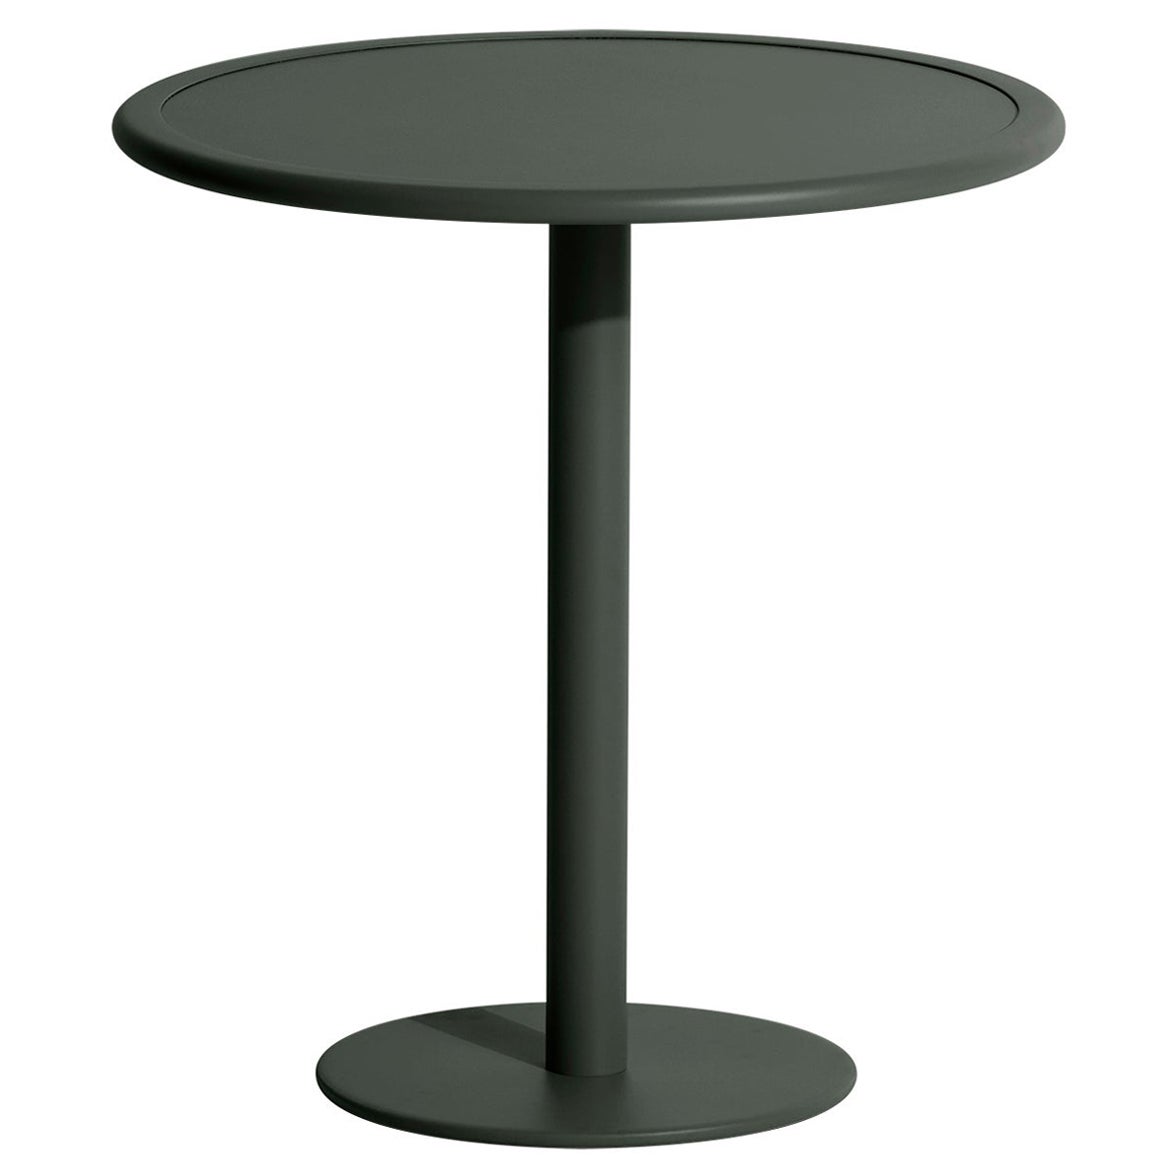 Petite Friture Week-End Bistro Round Dining Table in Glass Green Aluminium, 2017 For Sale